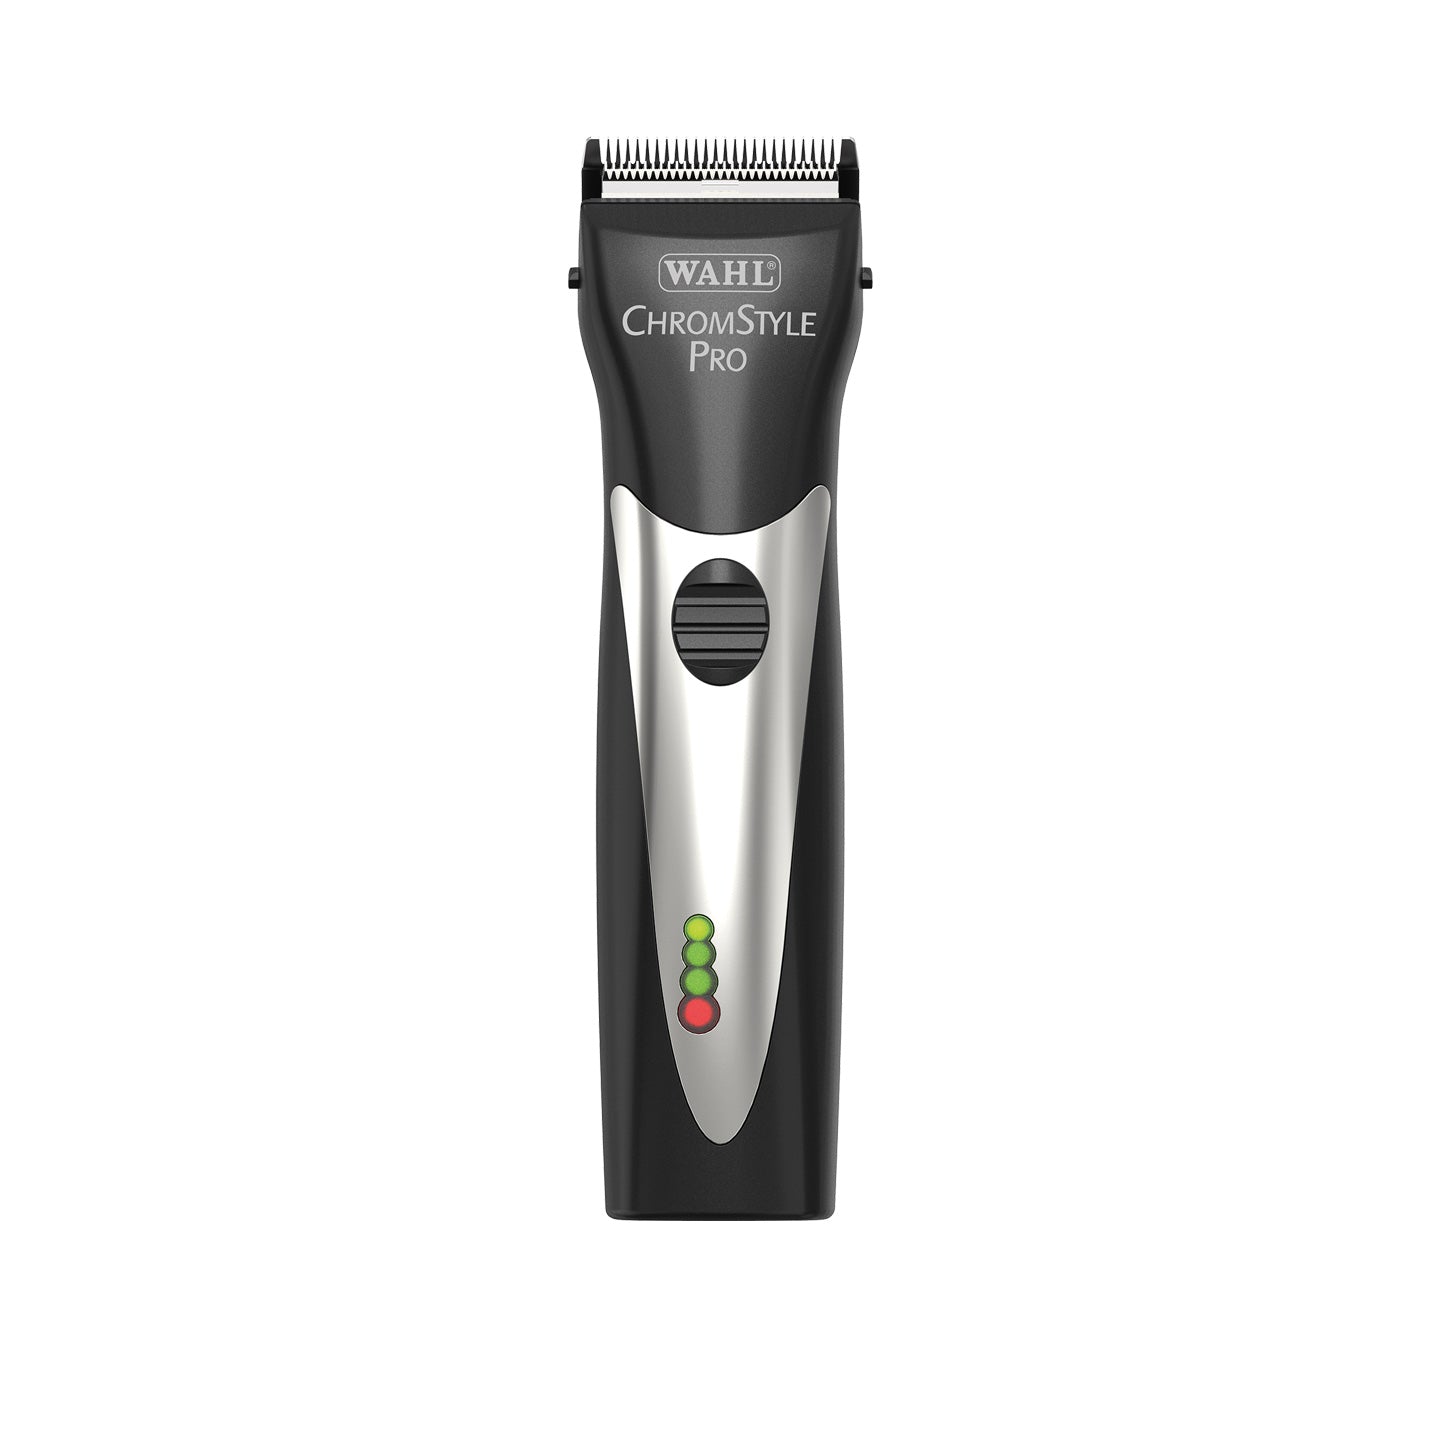 Wahl_clipper_chromstyle_WM8871-8371_front_web.jpg